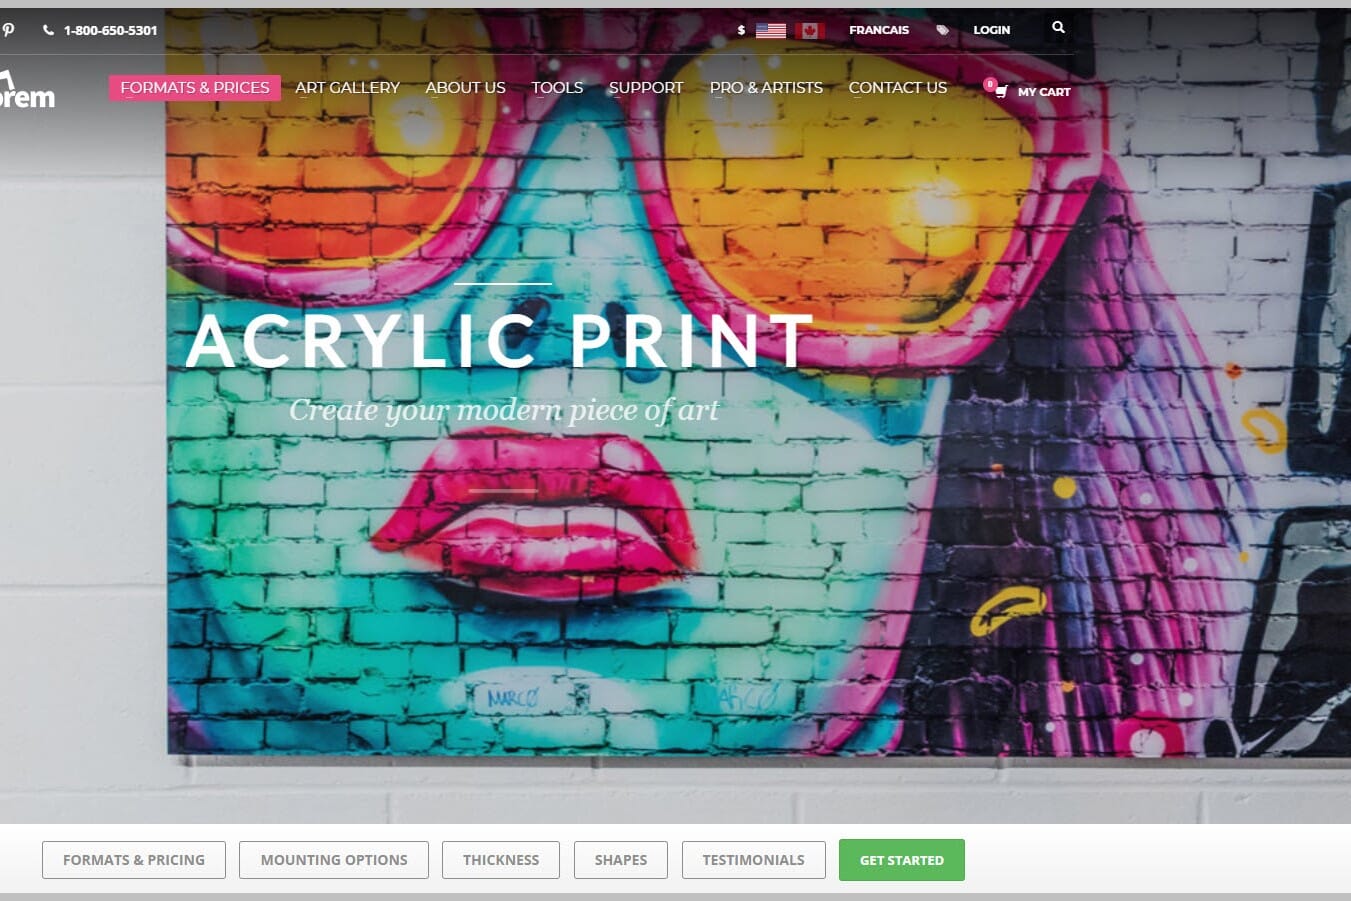 Acrylic vs Metal Prints: Which Should You Choose (and Why)?